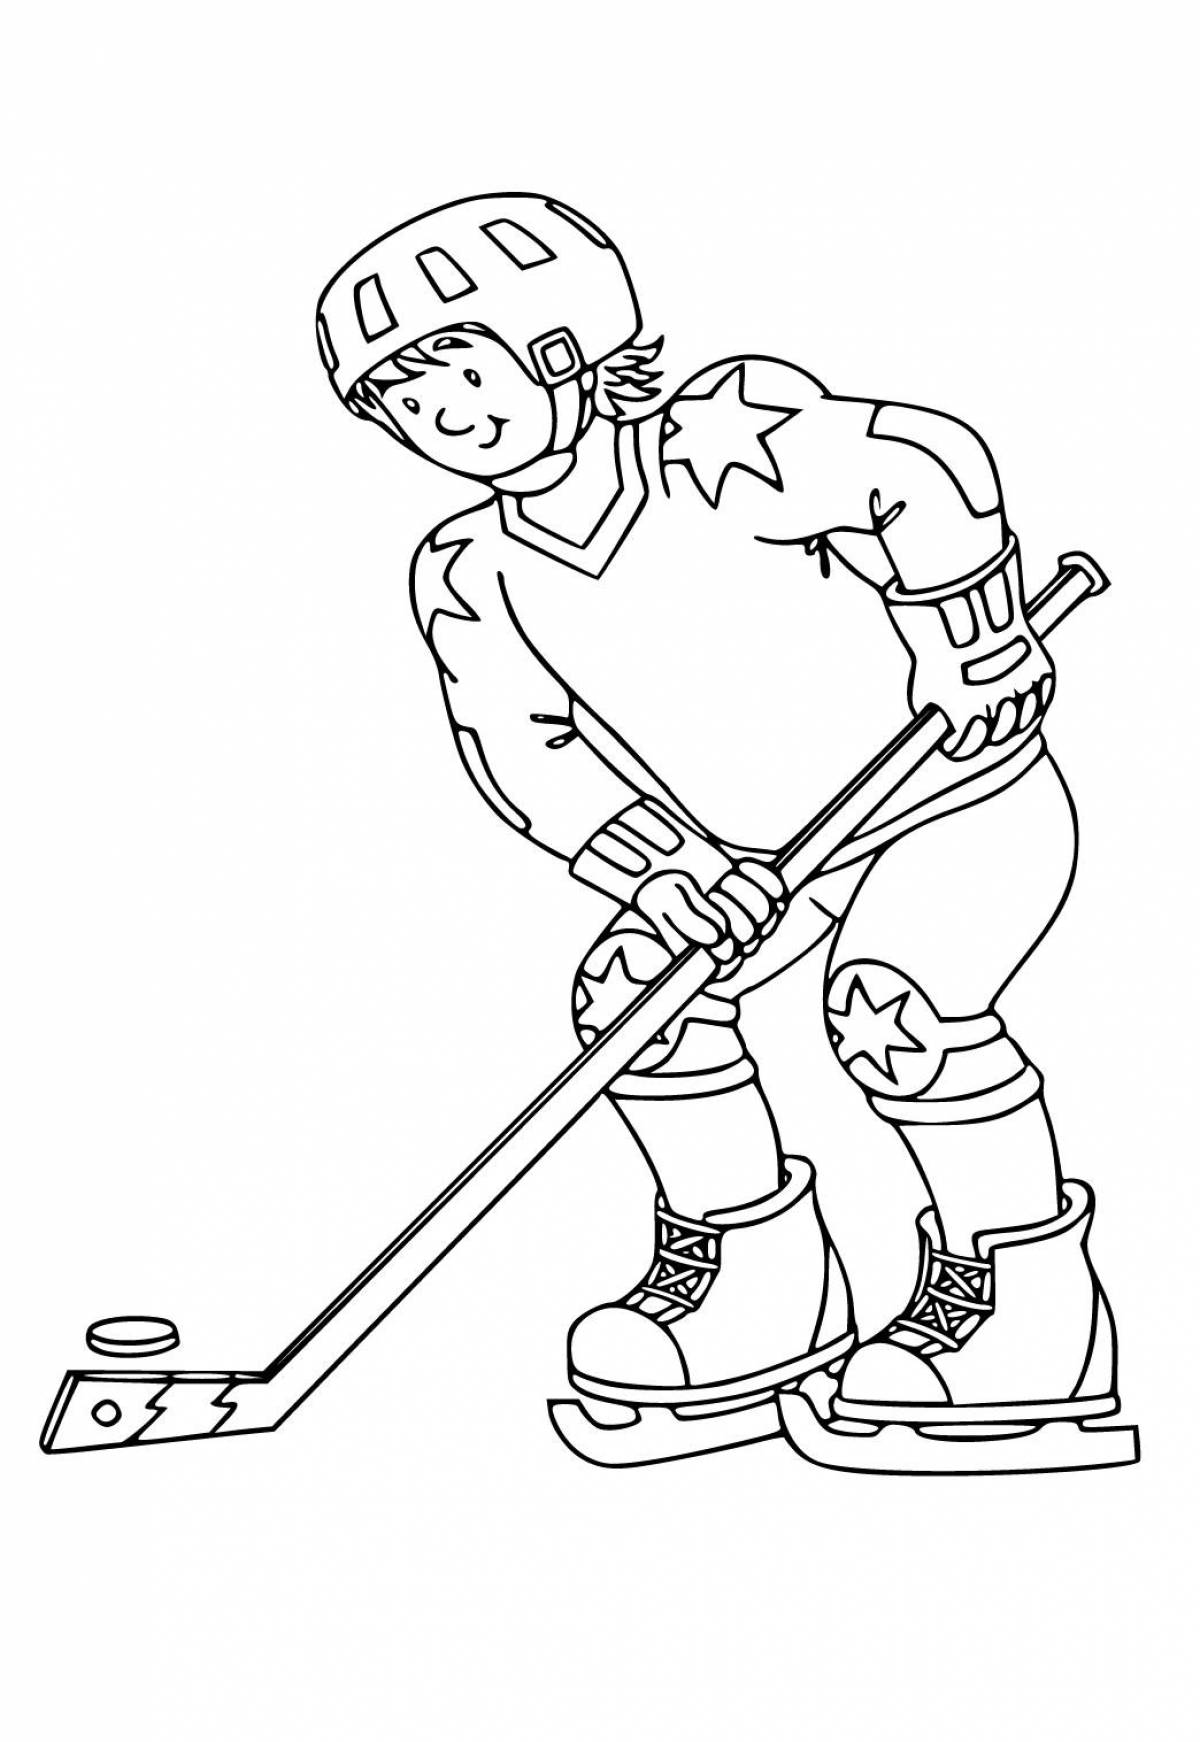 Bright hockey player coloring pages for kids